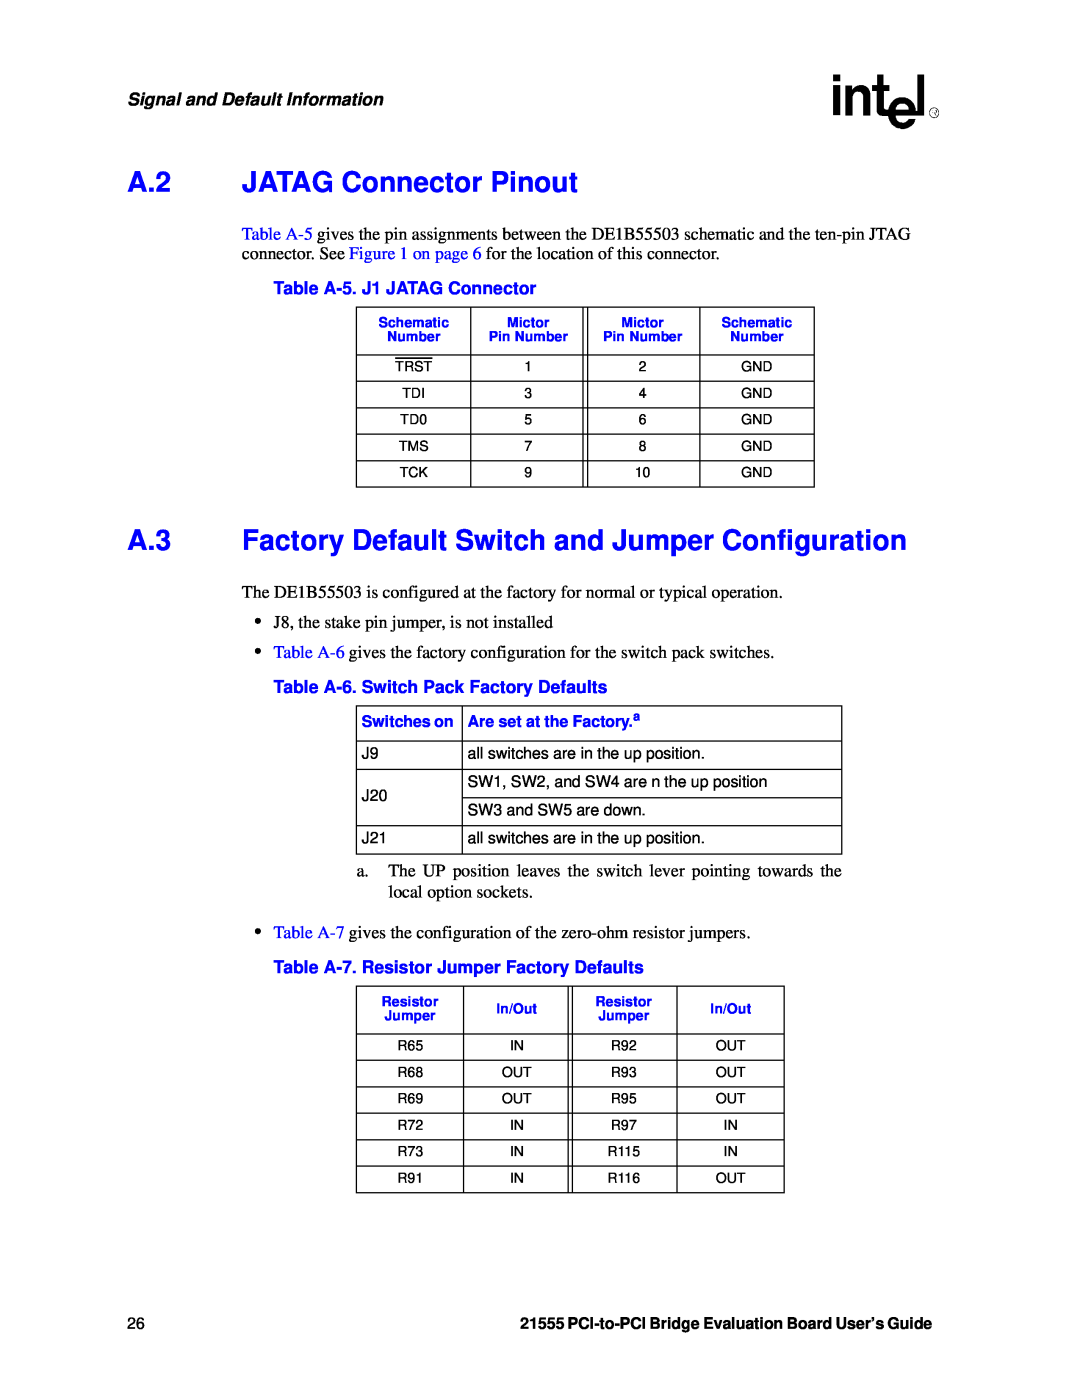 Intel 21555 A.2 JATAG Connector Pinout, A.3 Factory Default Switch and Jumper Configuration, Table A-5. J1 JATAG Connector 